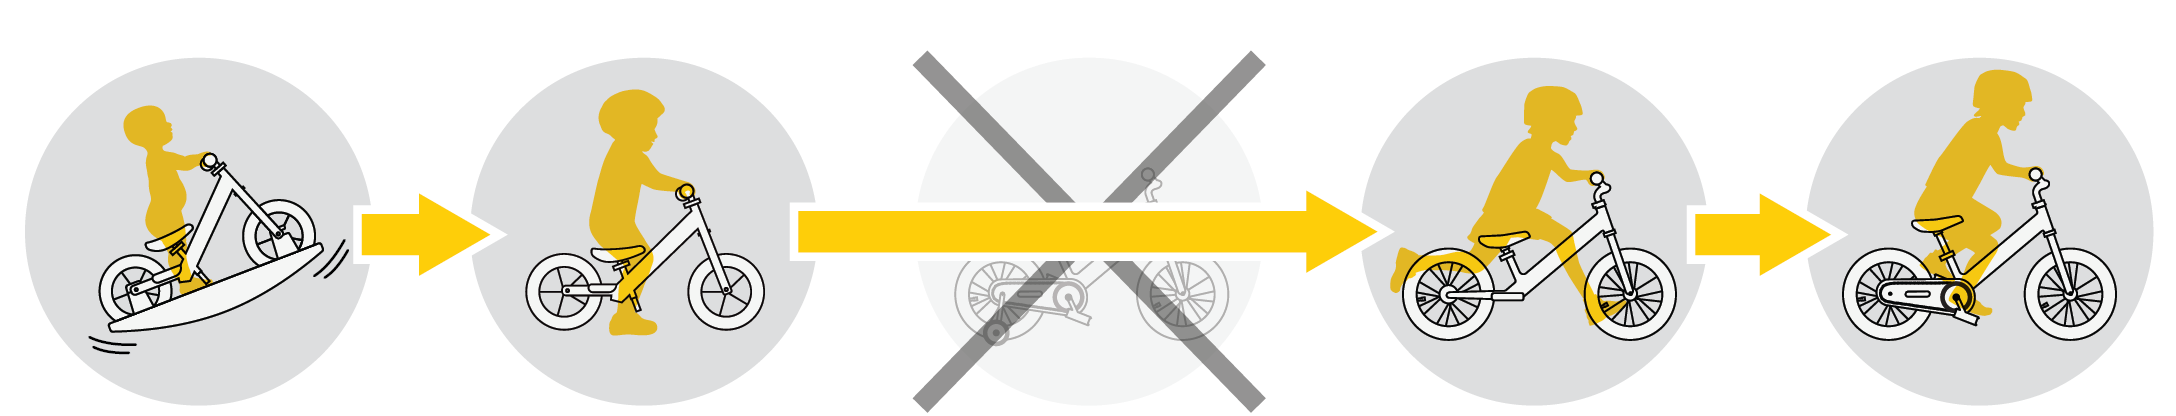 illustration of the skip training wheels learn-to-ride progression